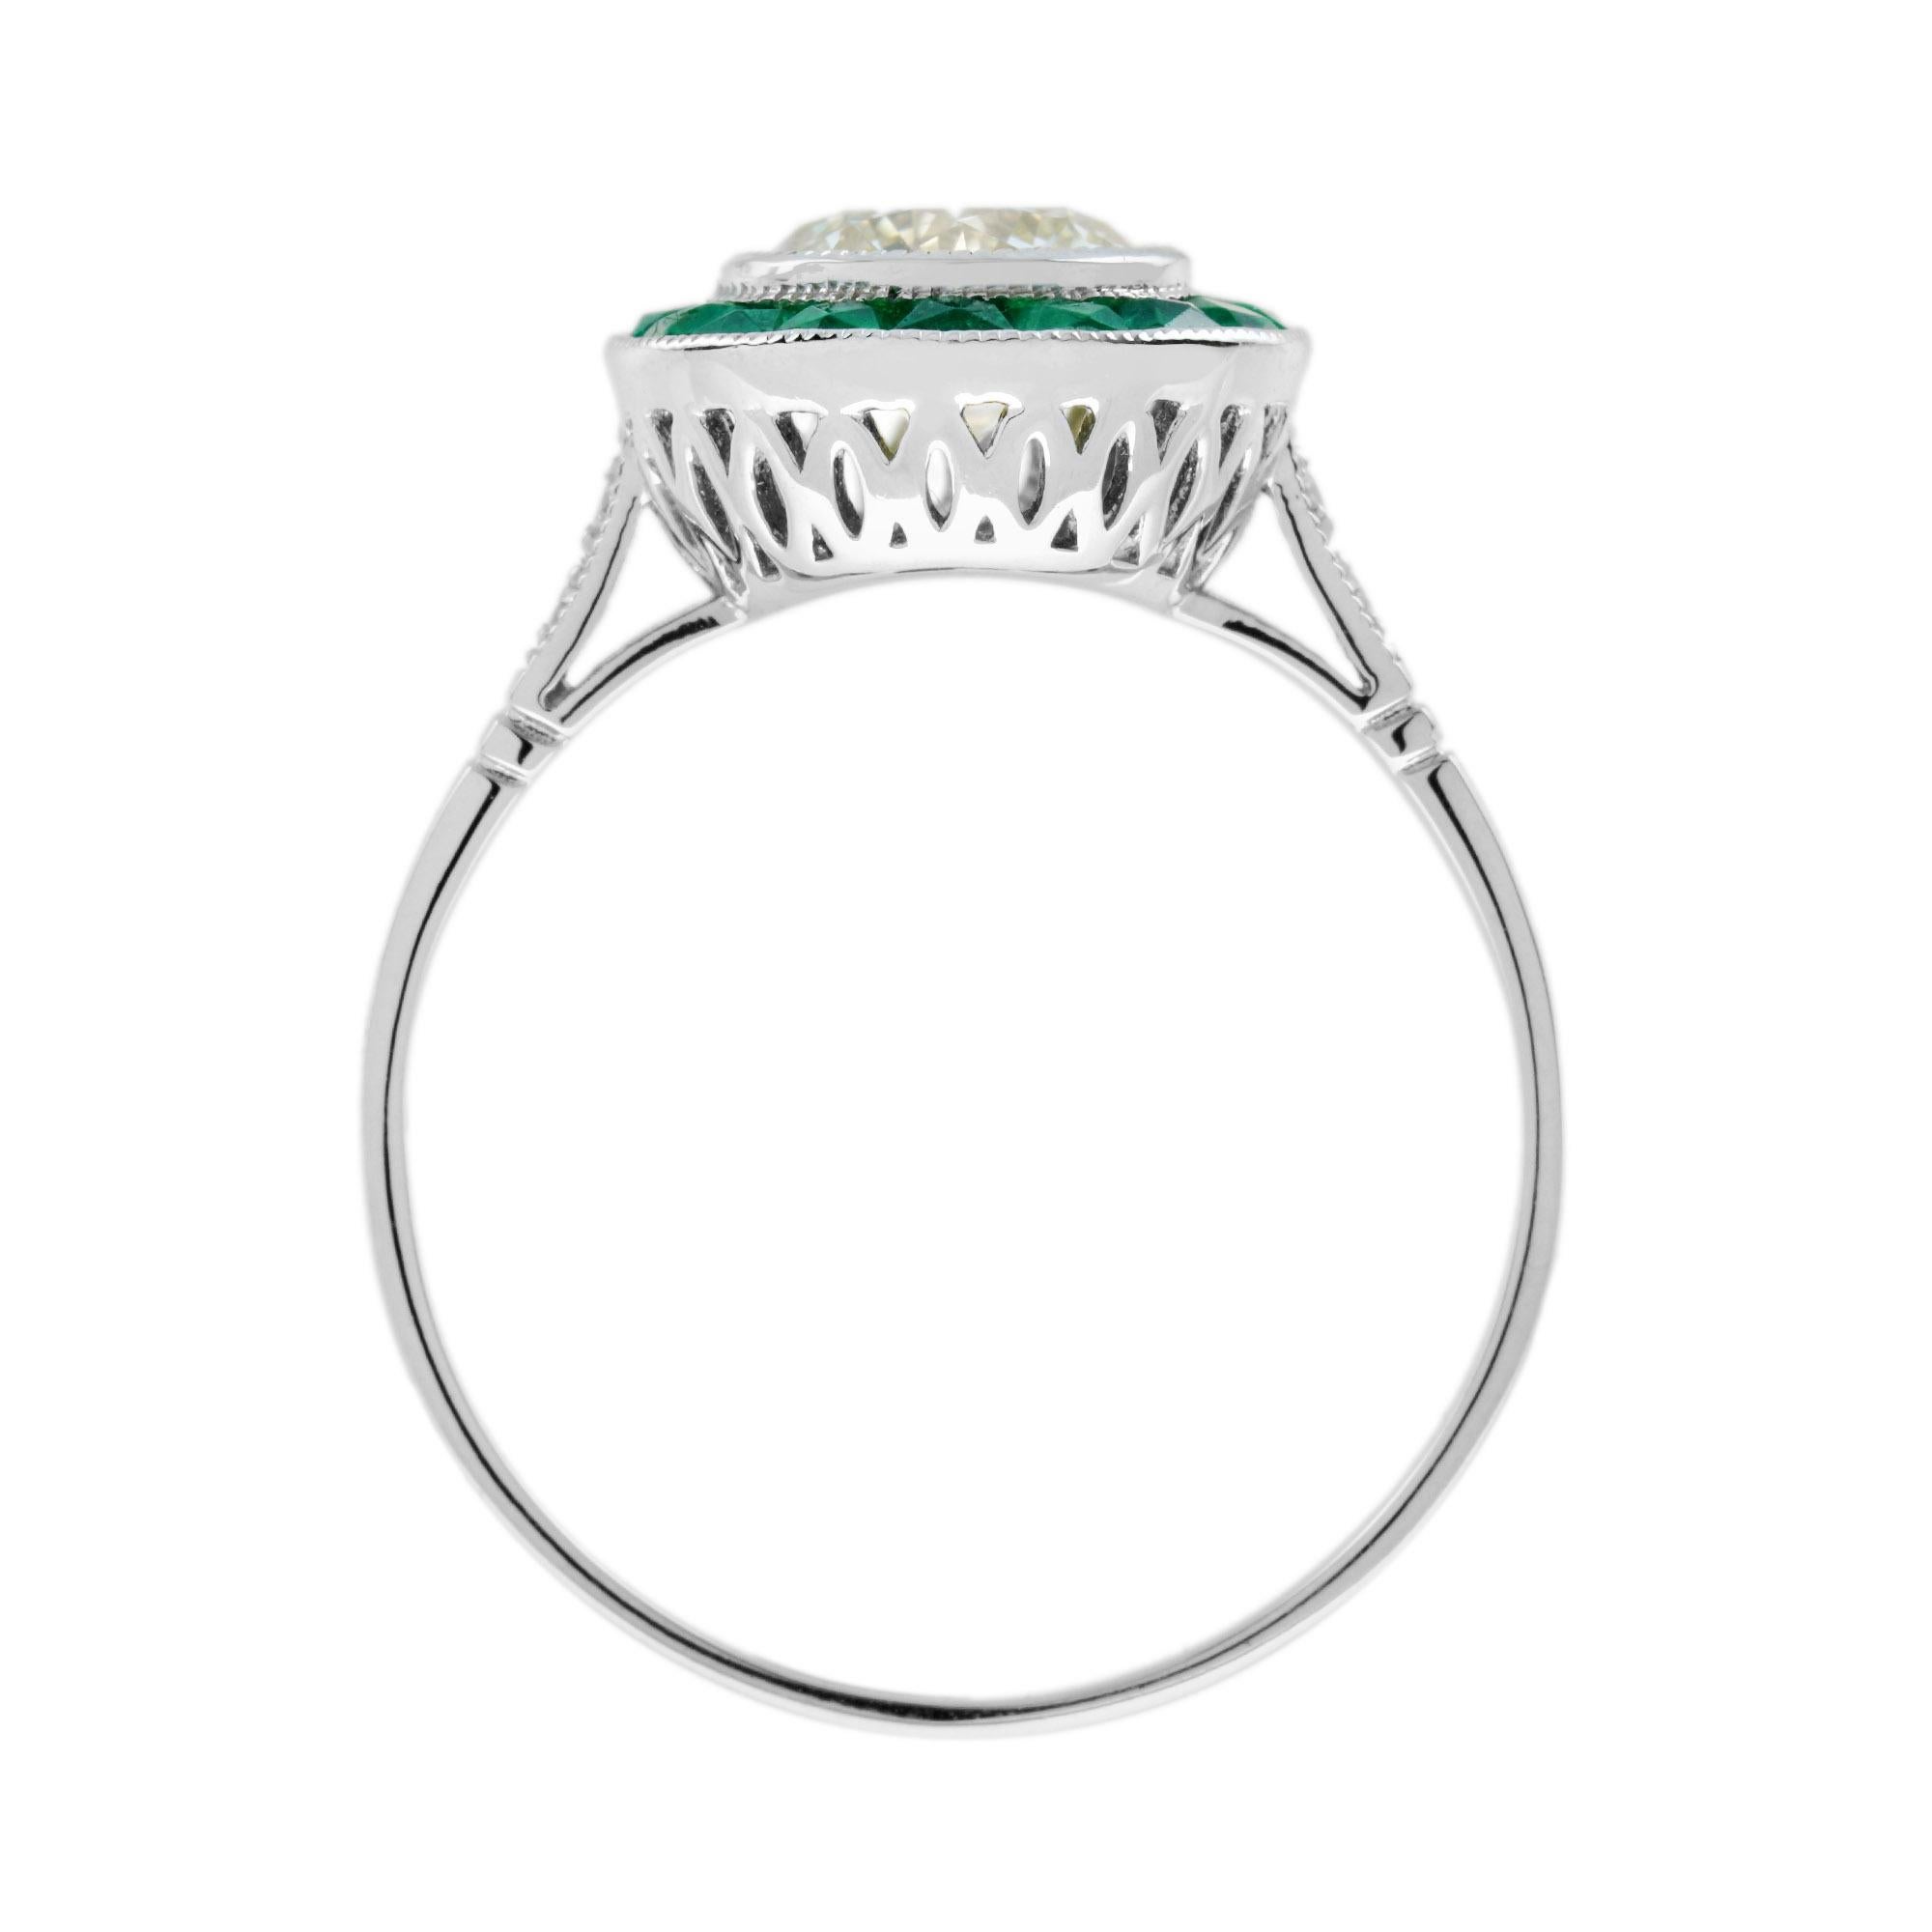 Certified 1 Ct. Diamond and Emerald Art Deco Style Target Ring in Platinum 950 For Sale 2